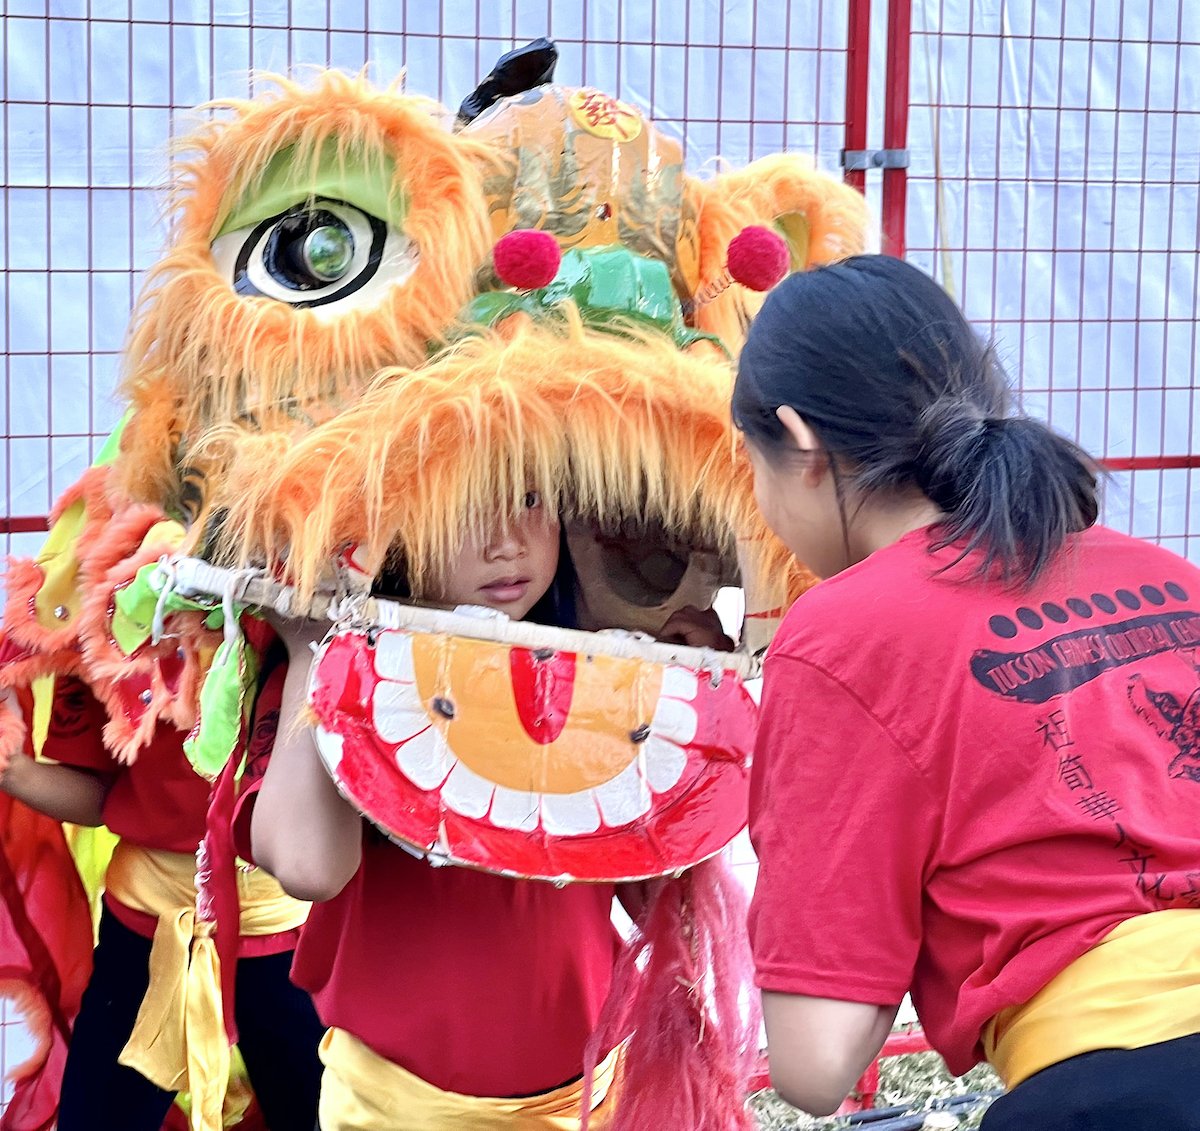 Tucson Chinese Lion Dance Troupe at Tucson Meet Yourself 2023 13.jpg